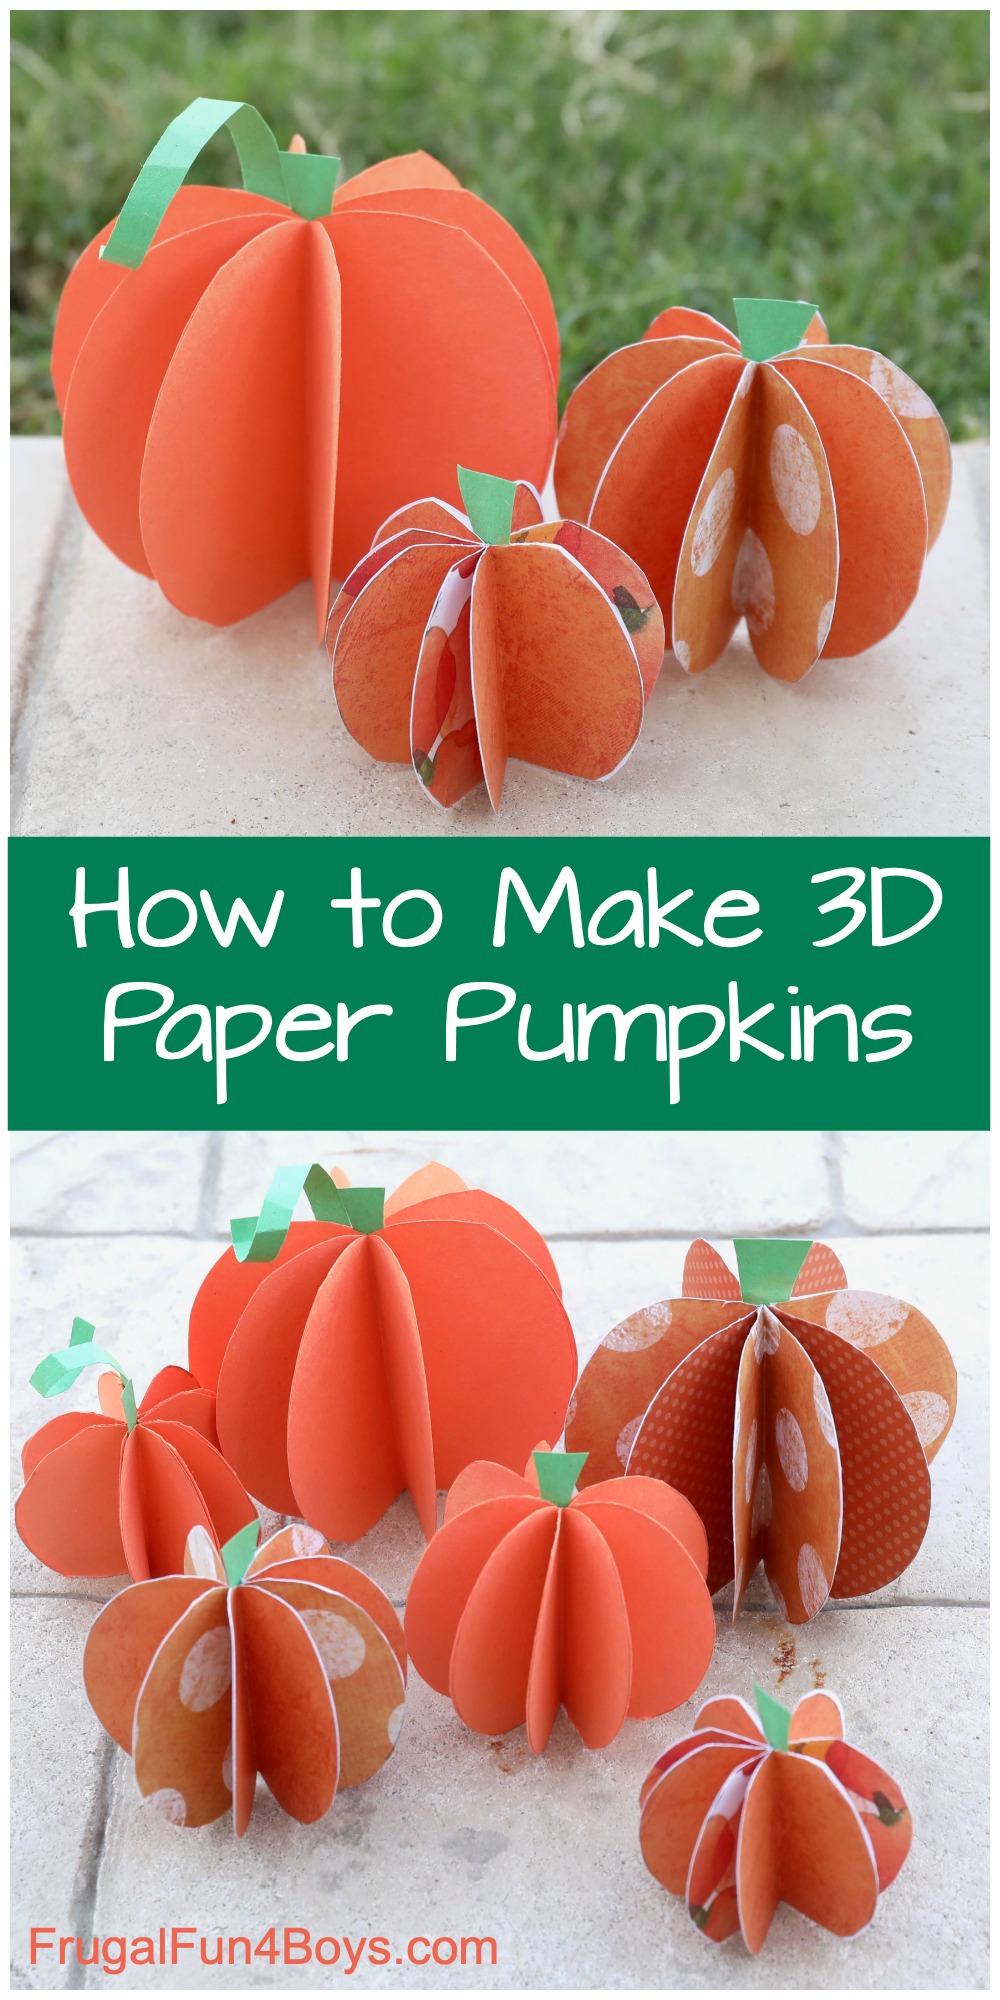 3D paper pumpkins made from construction paper and scrapbook paper.